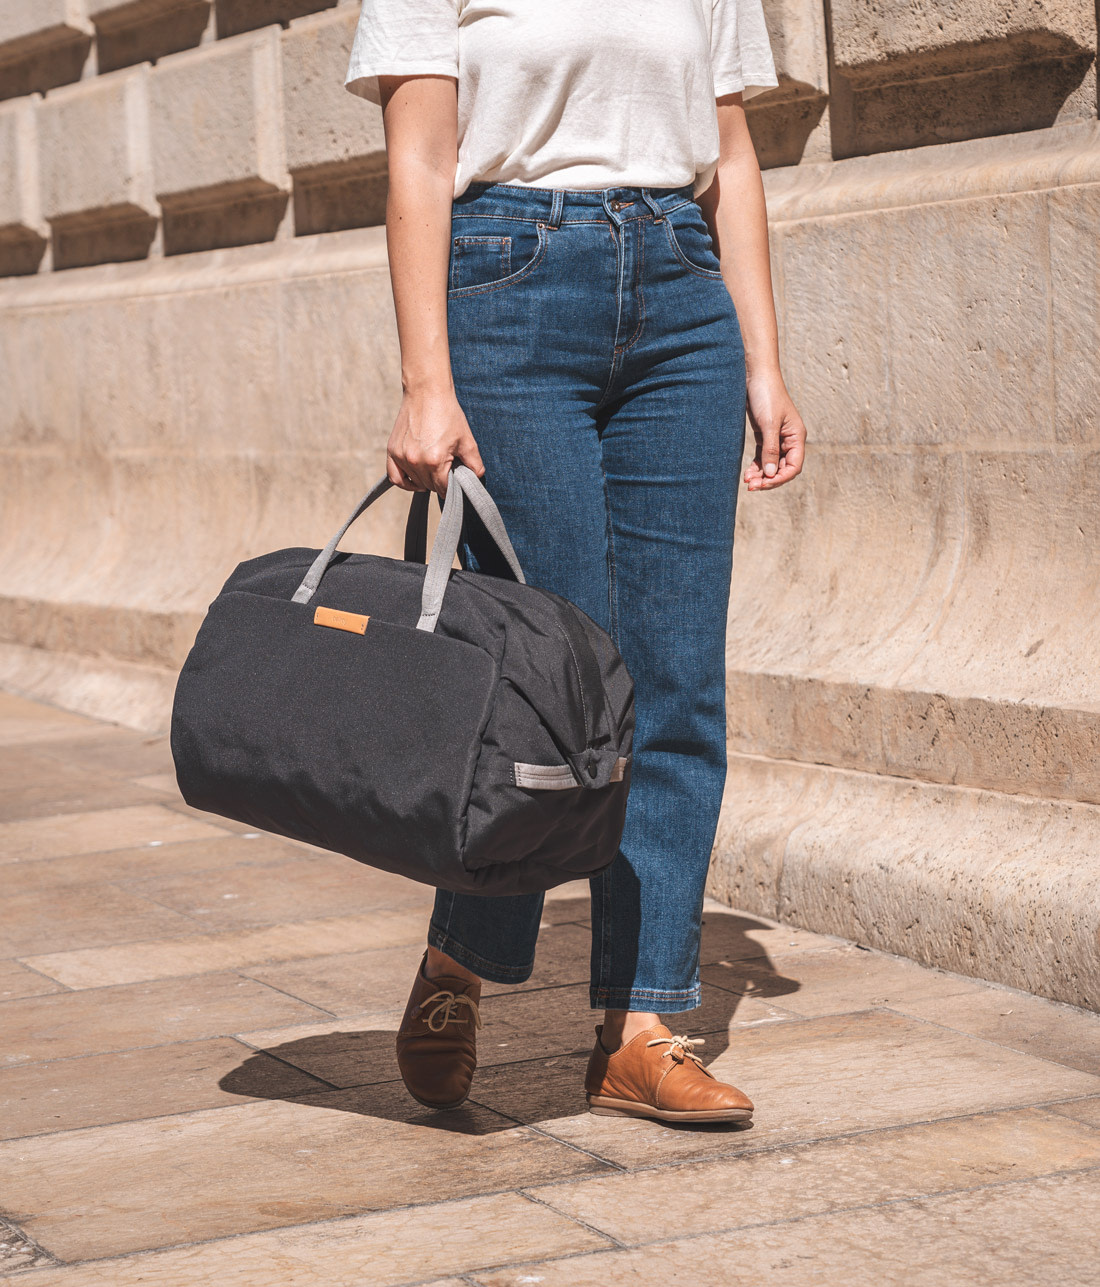 The best luxury weekend bags for short stays